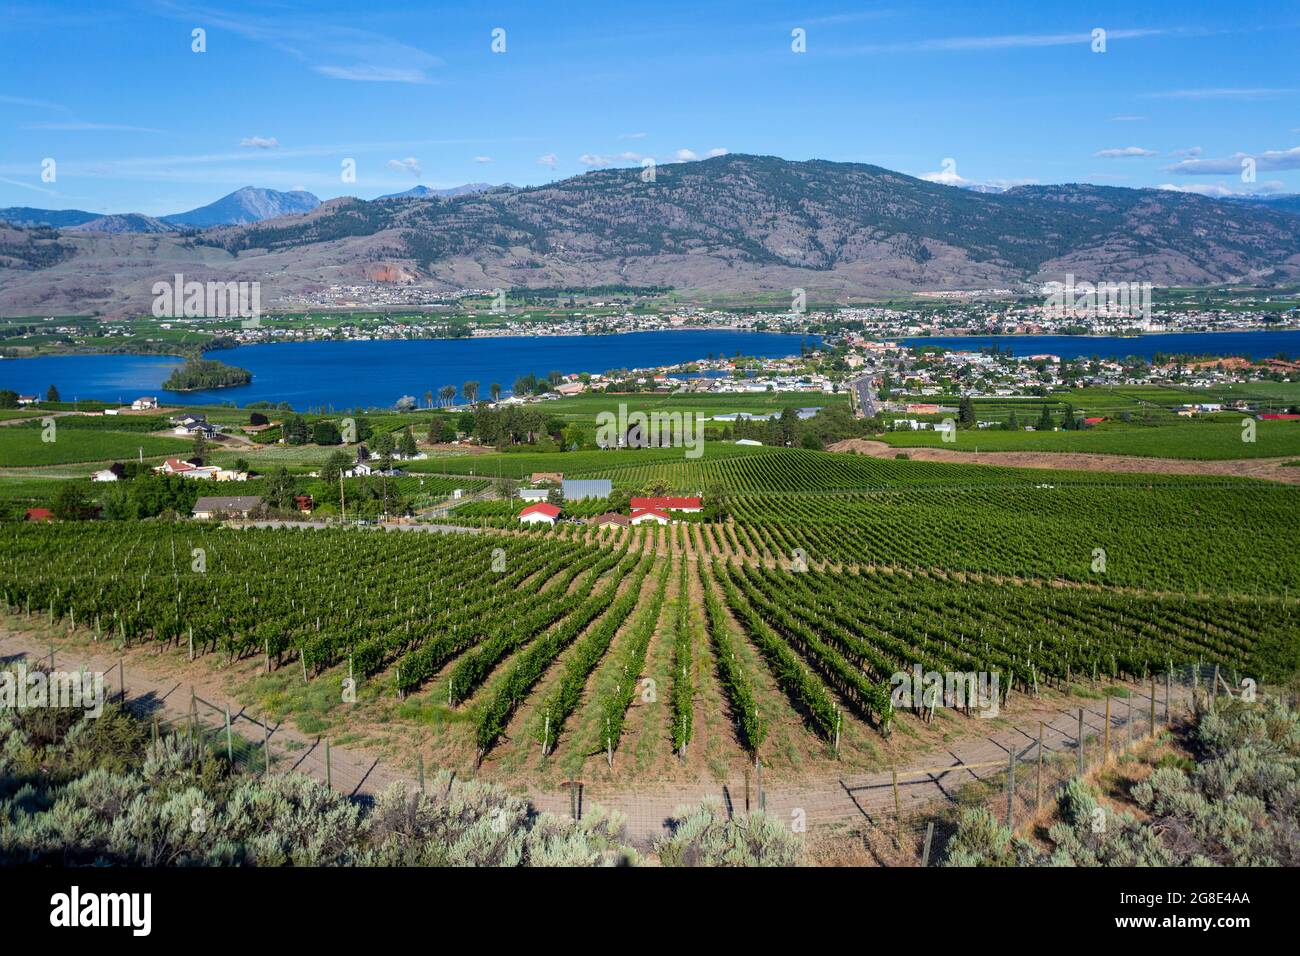 View of the agricultural landscape and vineyards during summer season in the small town of Osoyoos located in the Okanagan Valley, British Columbia, C Stock Photo